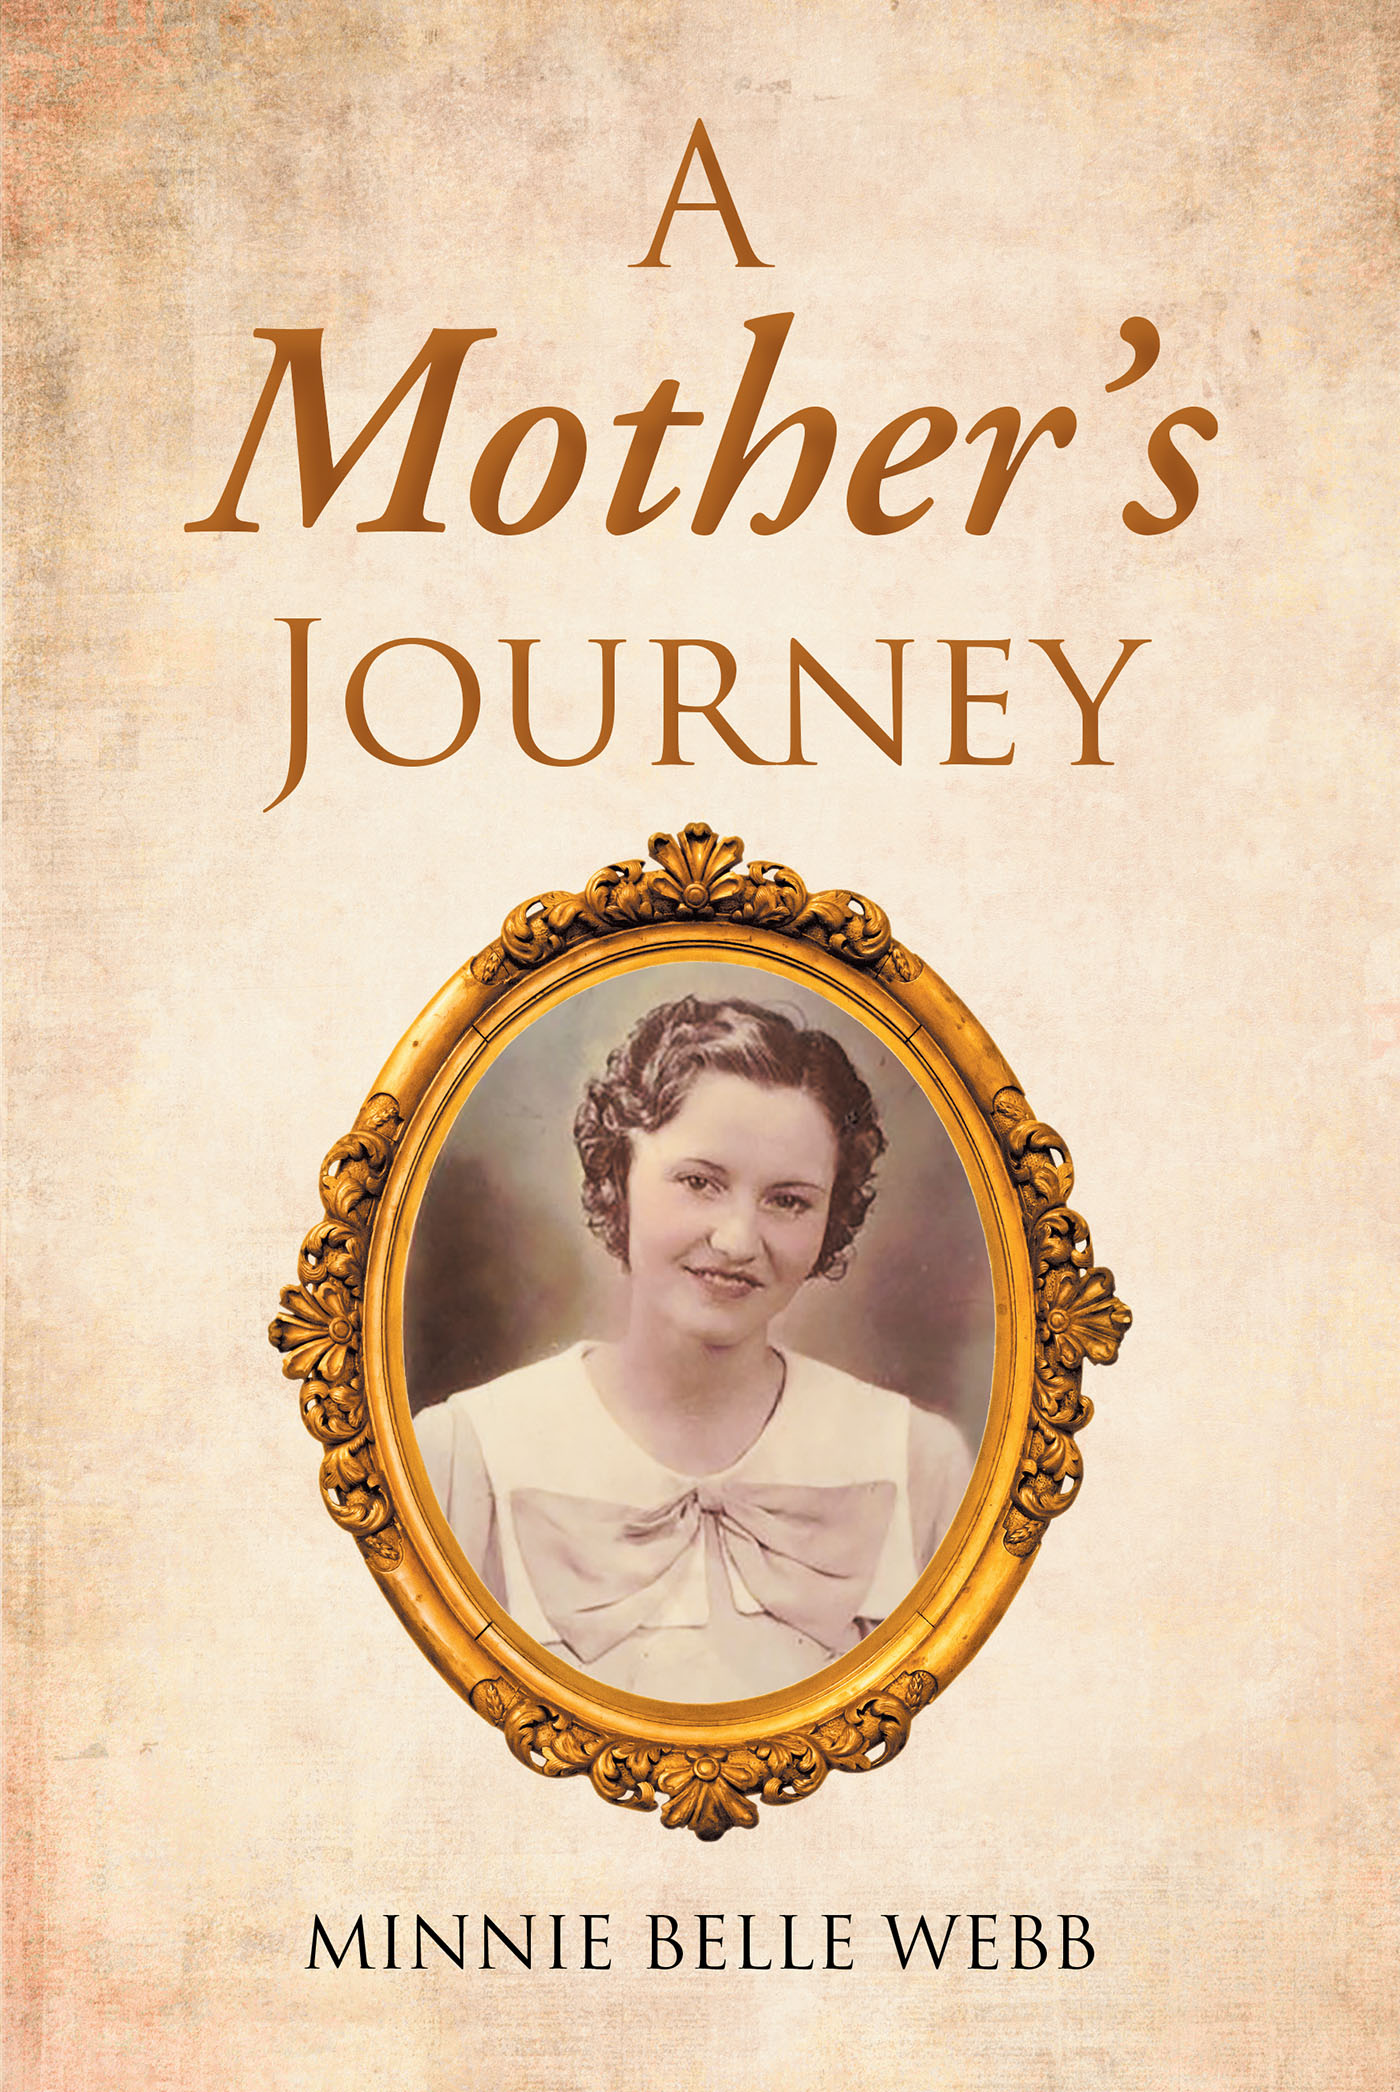 Minnie Belle Webb’s Newly Released "A Mother’s Journey" is a Vibrant Autobiography That Shares a Peek Into Simpler Days Growing Up in a Large Family